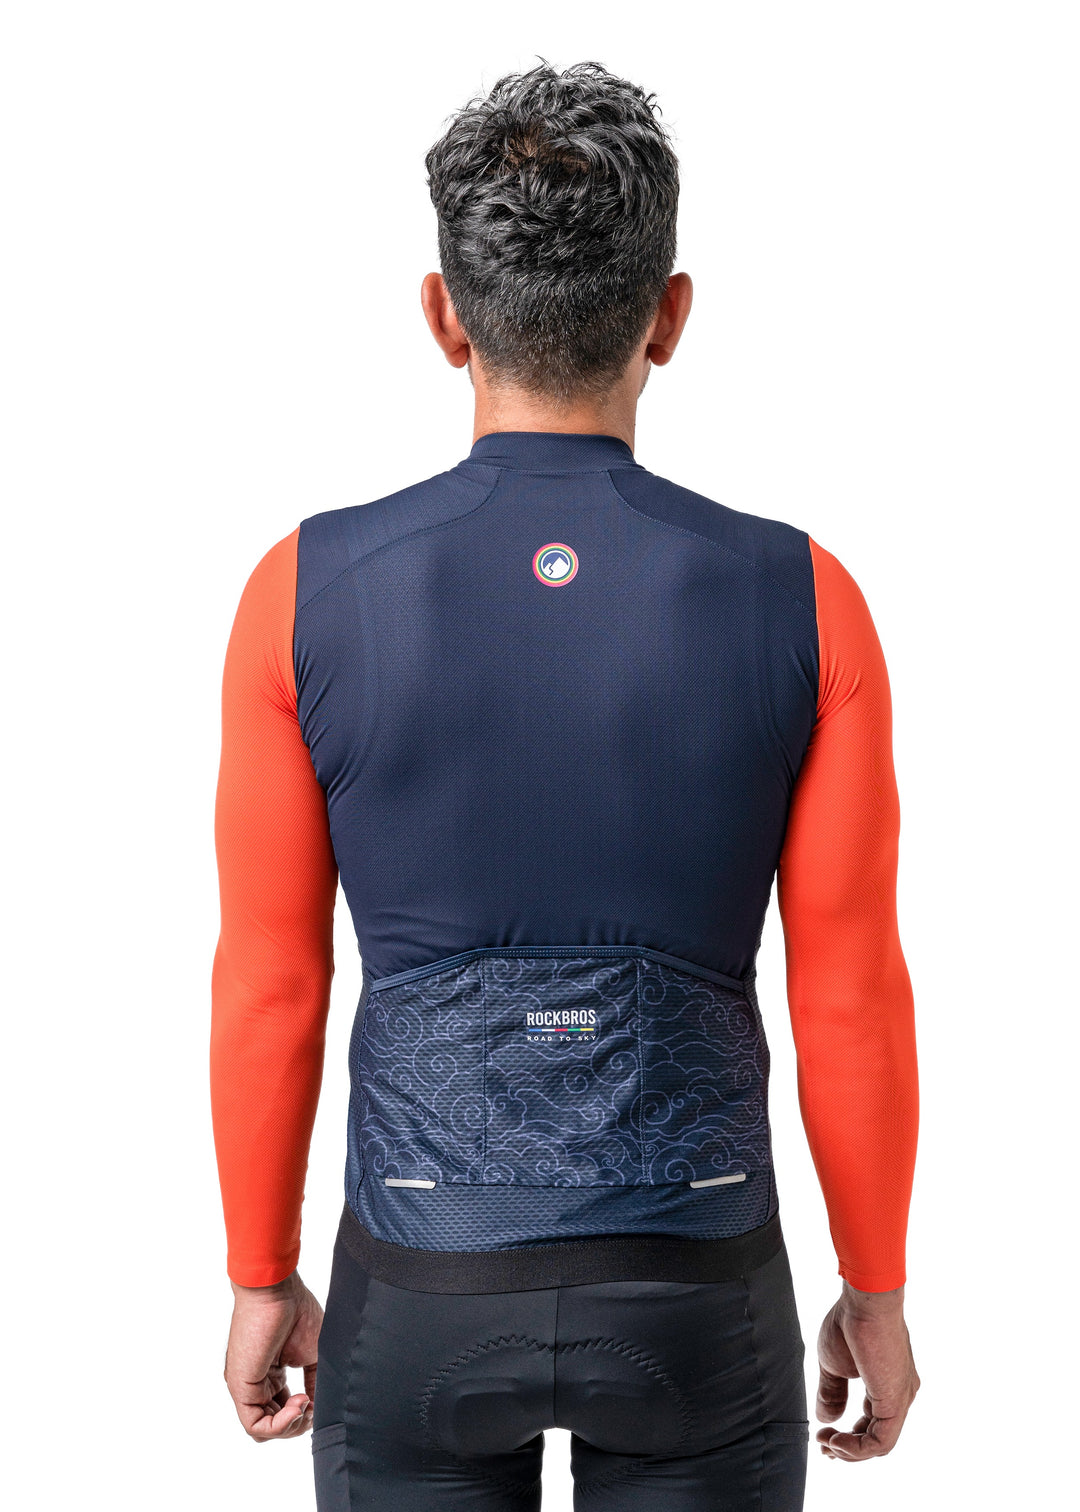 Men's Cycling Long-Sleeved Jersey